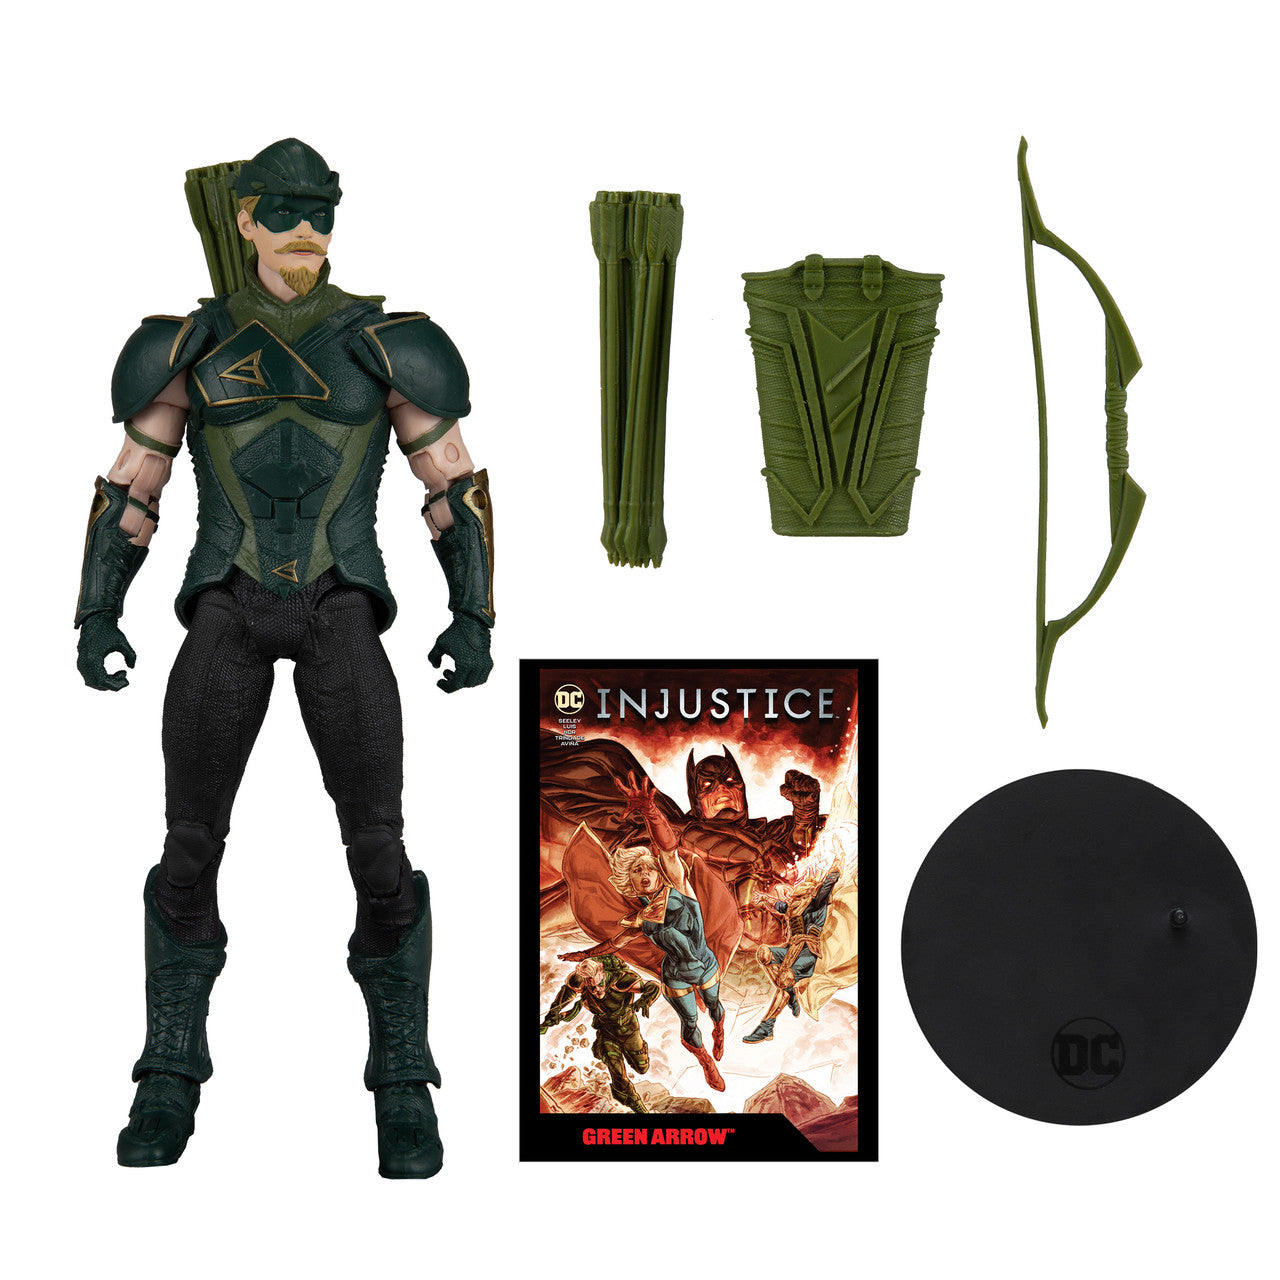 Green Arrow w/ Injustice 2 Comic (DC Page Punchers) 7" Figure by Mcfarlane Toys -McFarlane Toys - India - www.superherotoystore.com